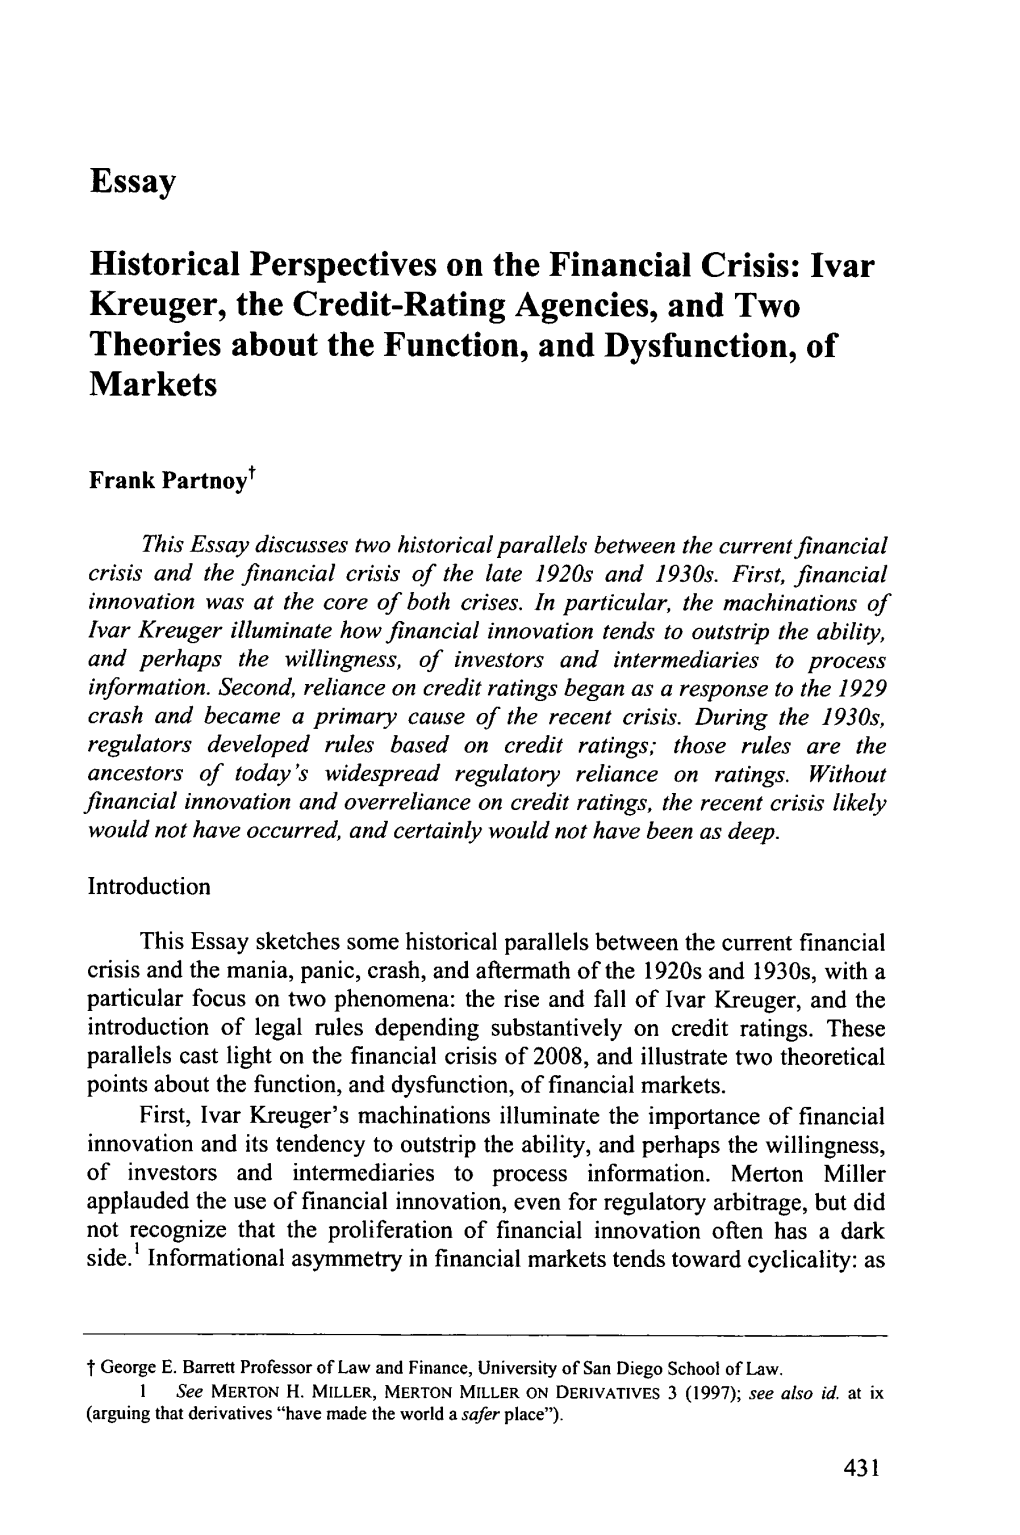 Historical Perspectives on the Financial Crisis: Ivar Kreuger, the Credit-Rating Agencies, and Two Theories About the Function, and Dysfunction, of Markets